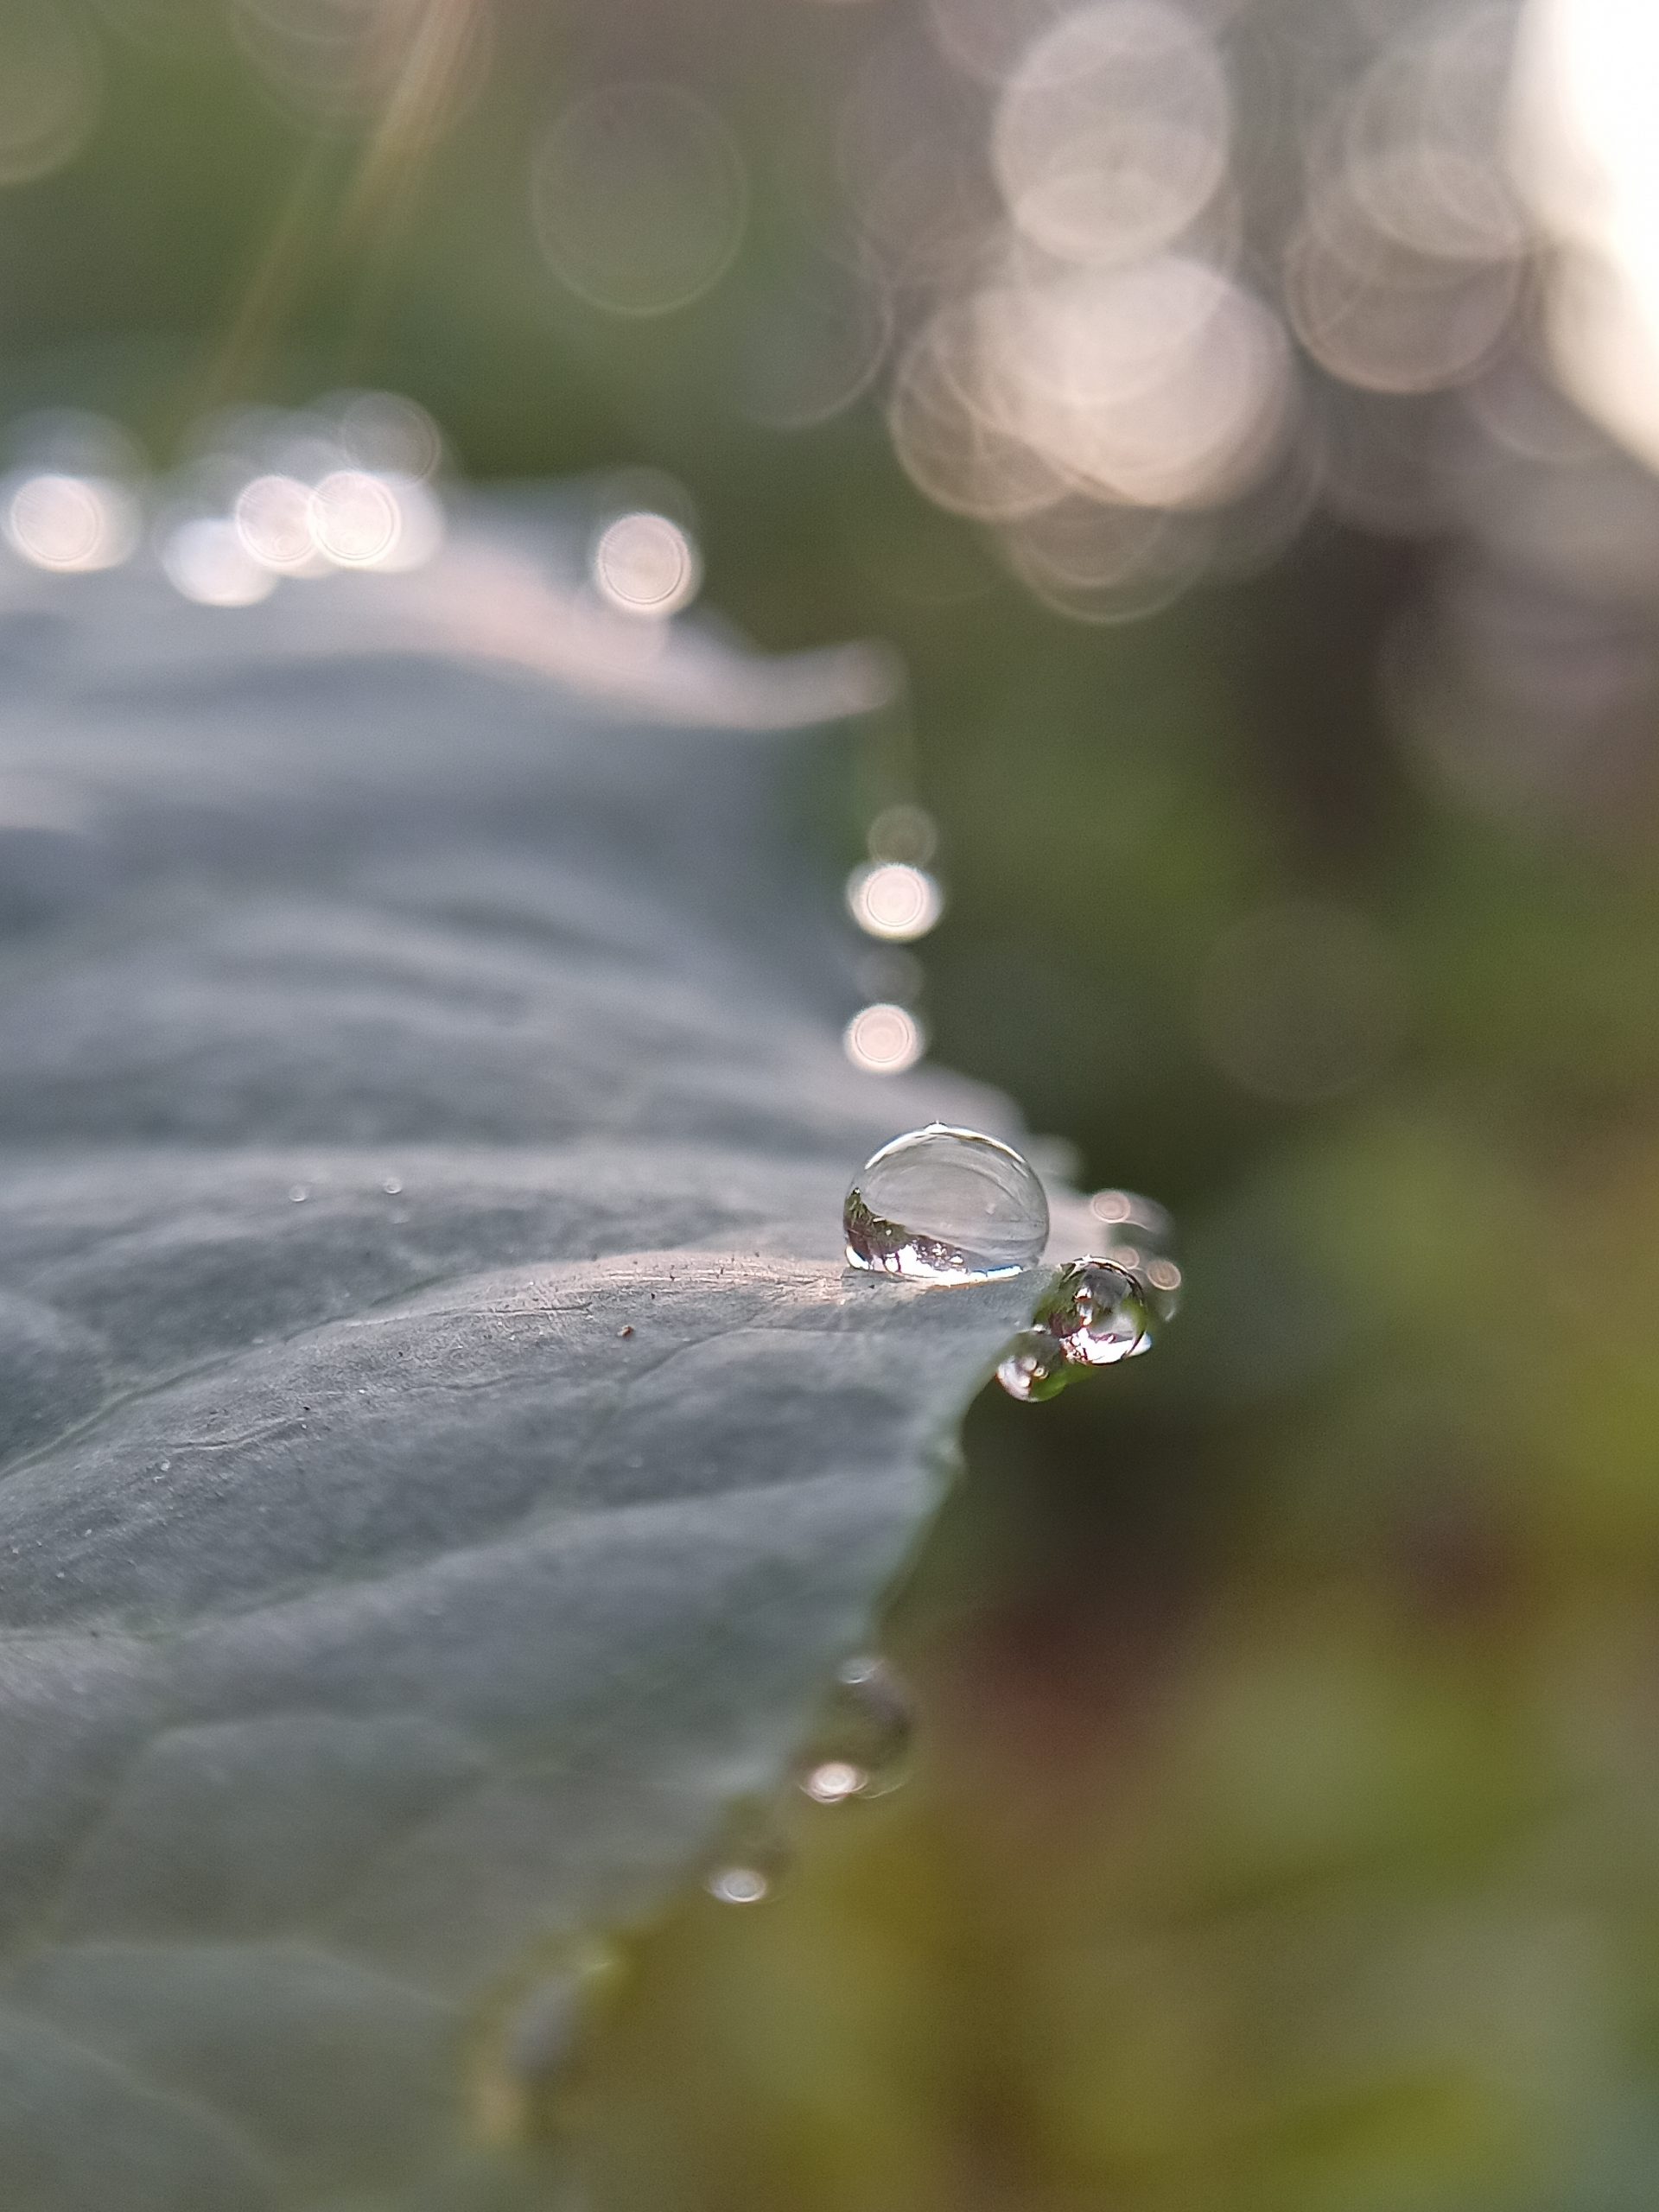 Waterdrops on the plant leaf